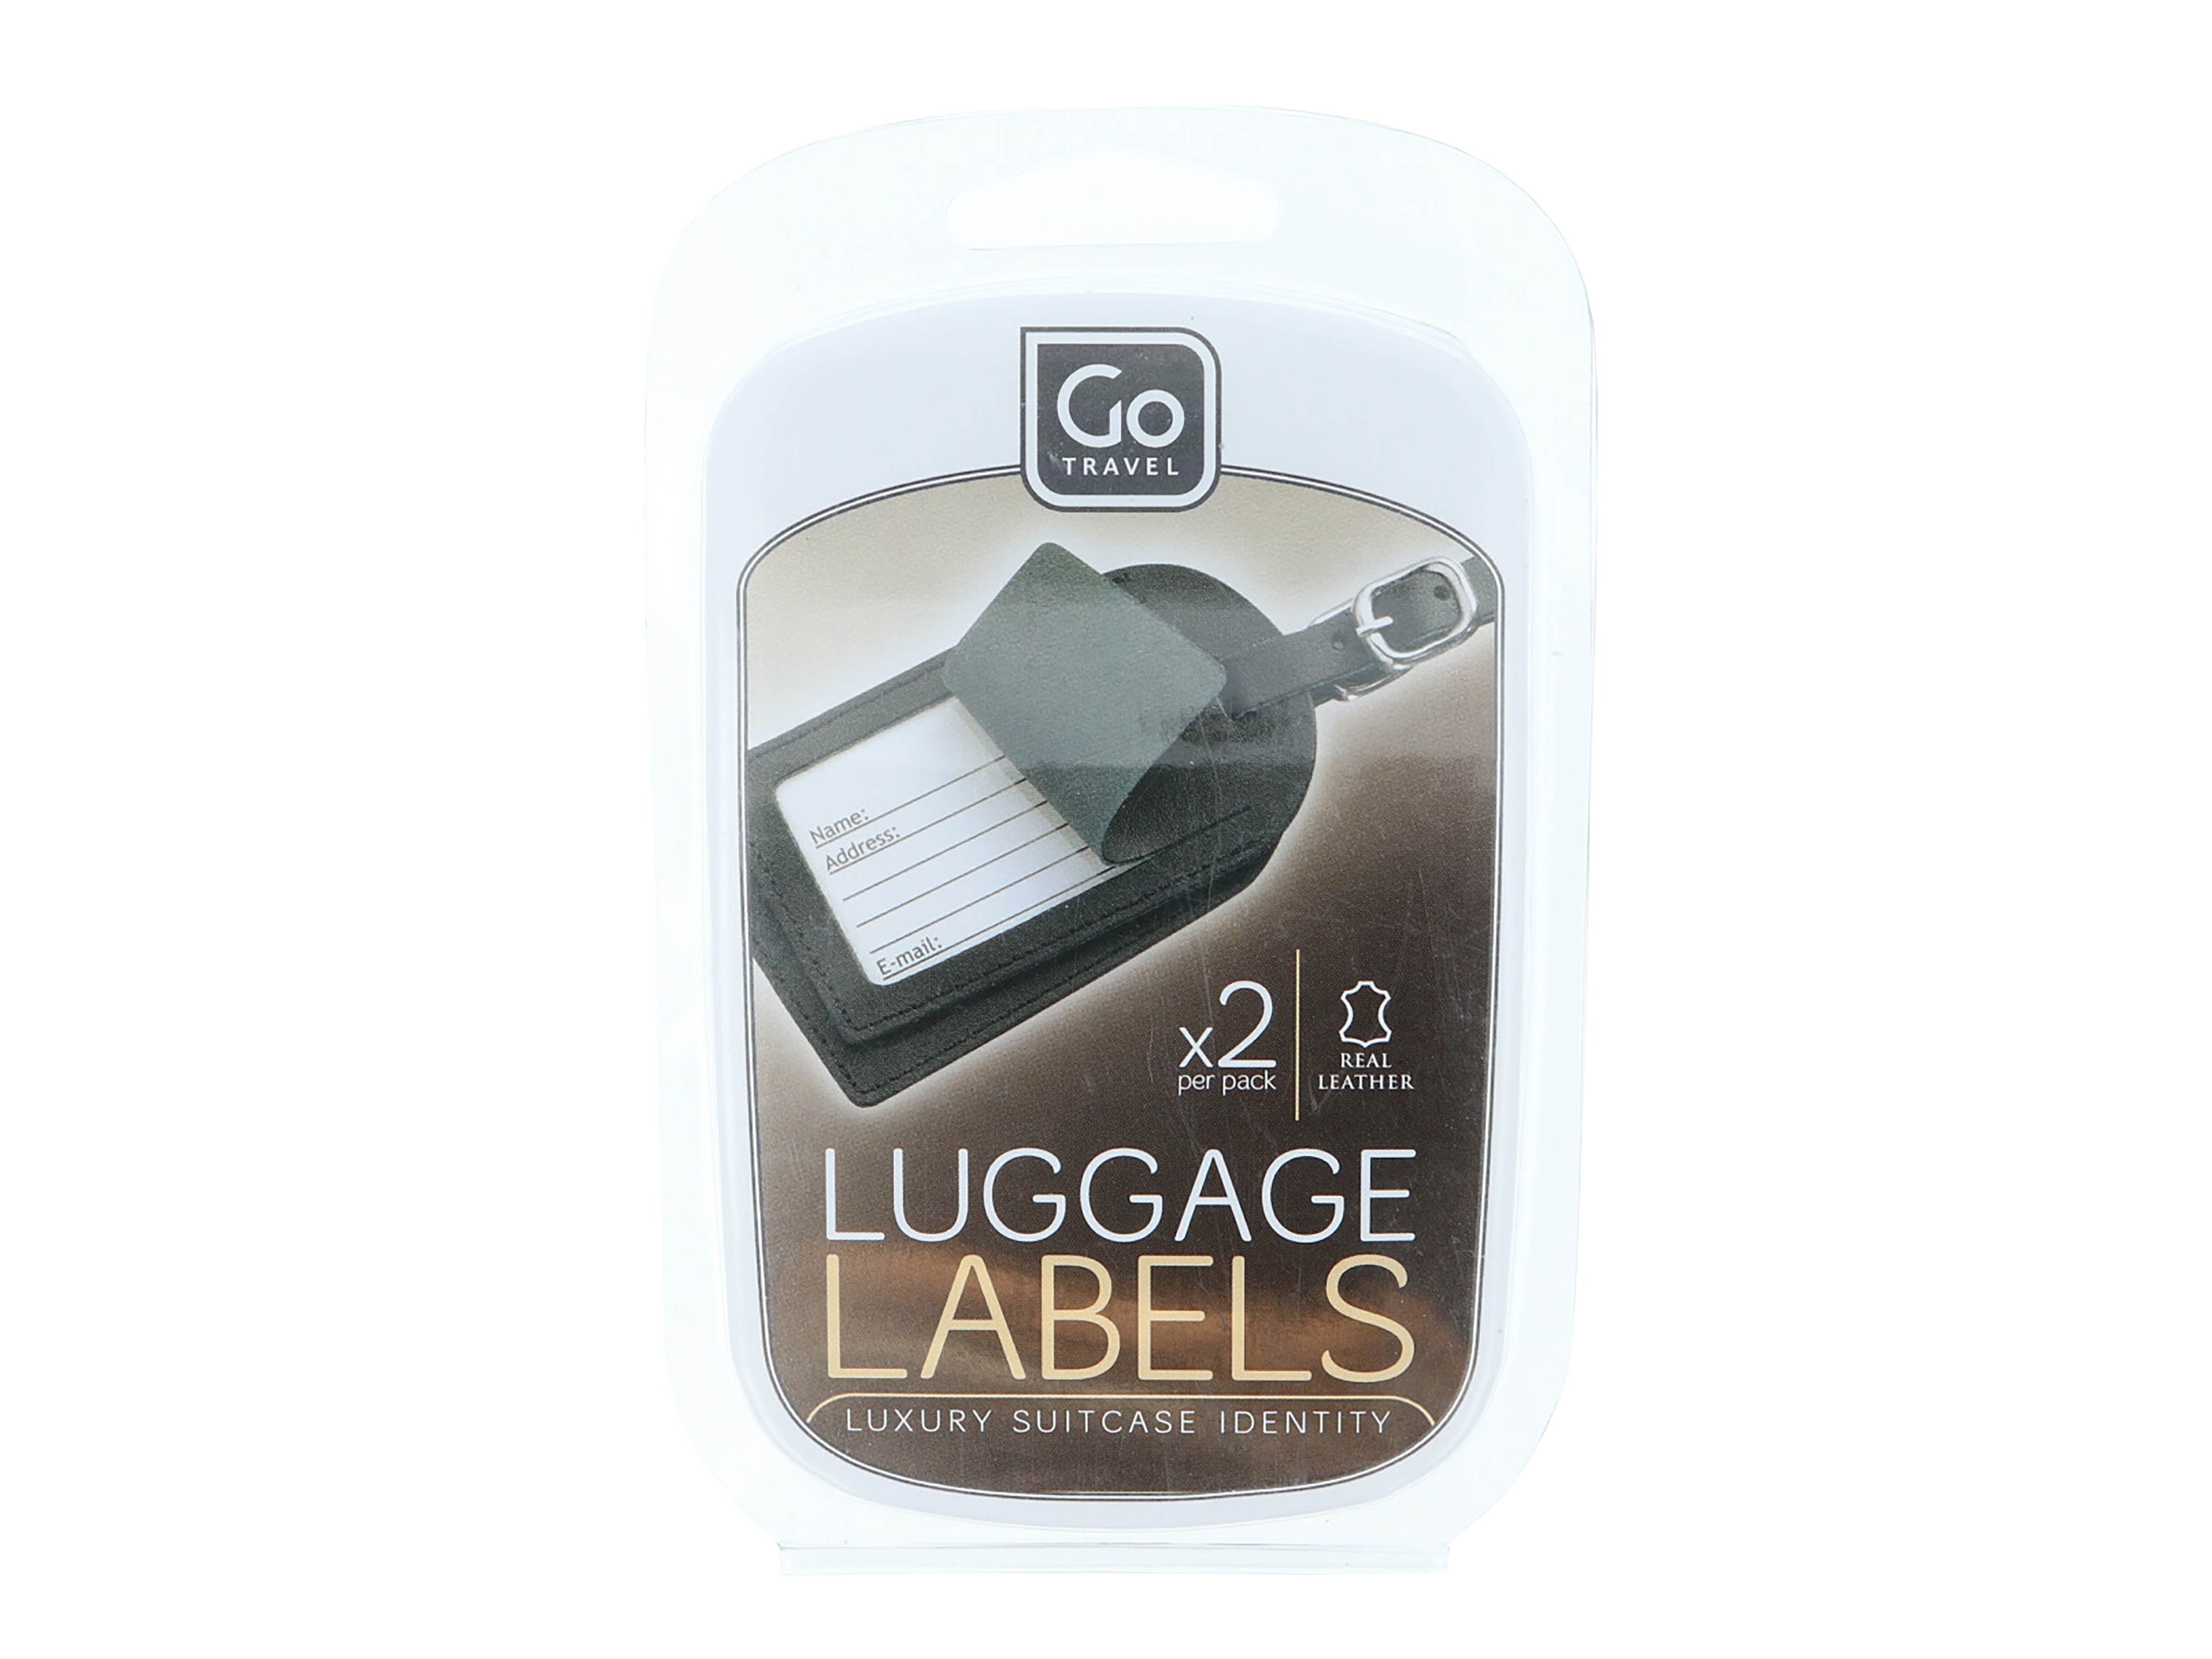 Go Travel 2 Leather Labels, 1 stk.